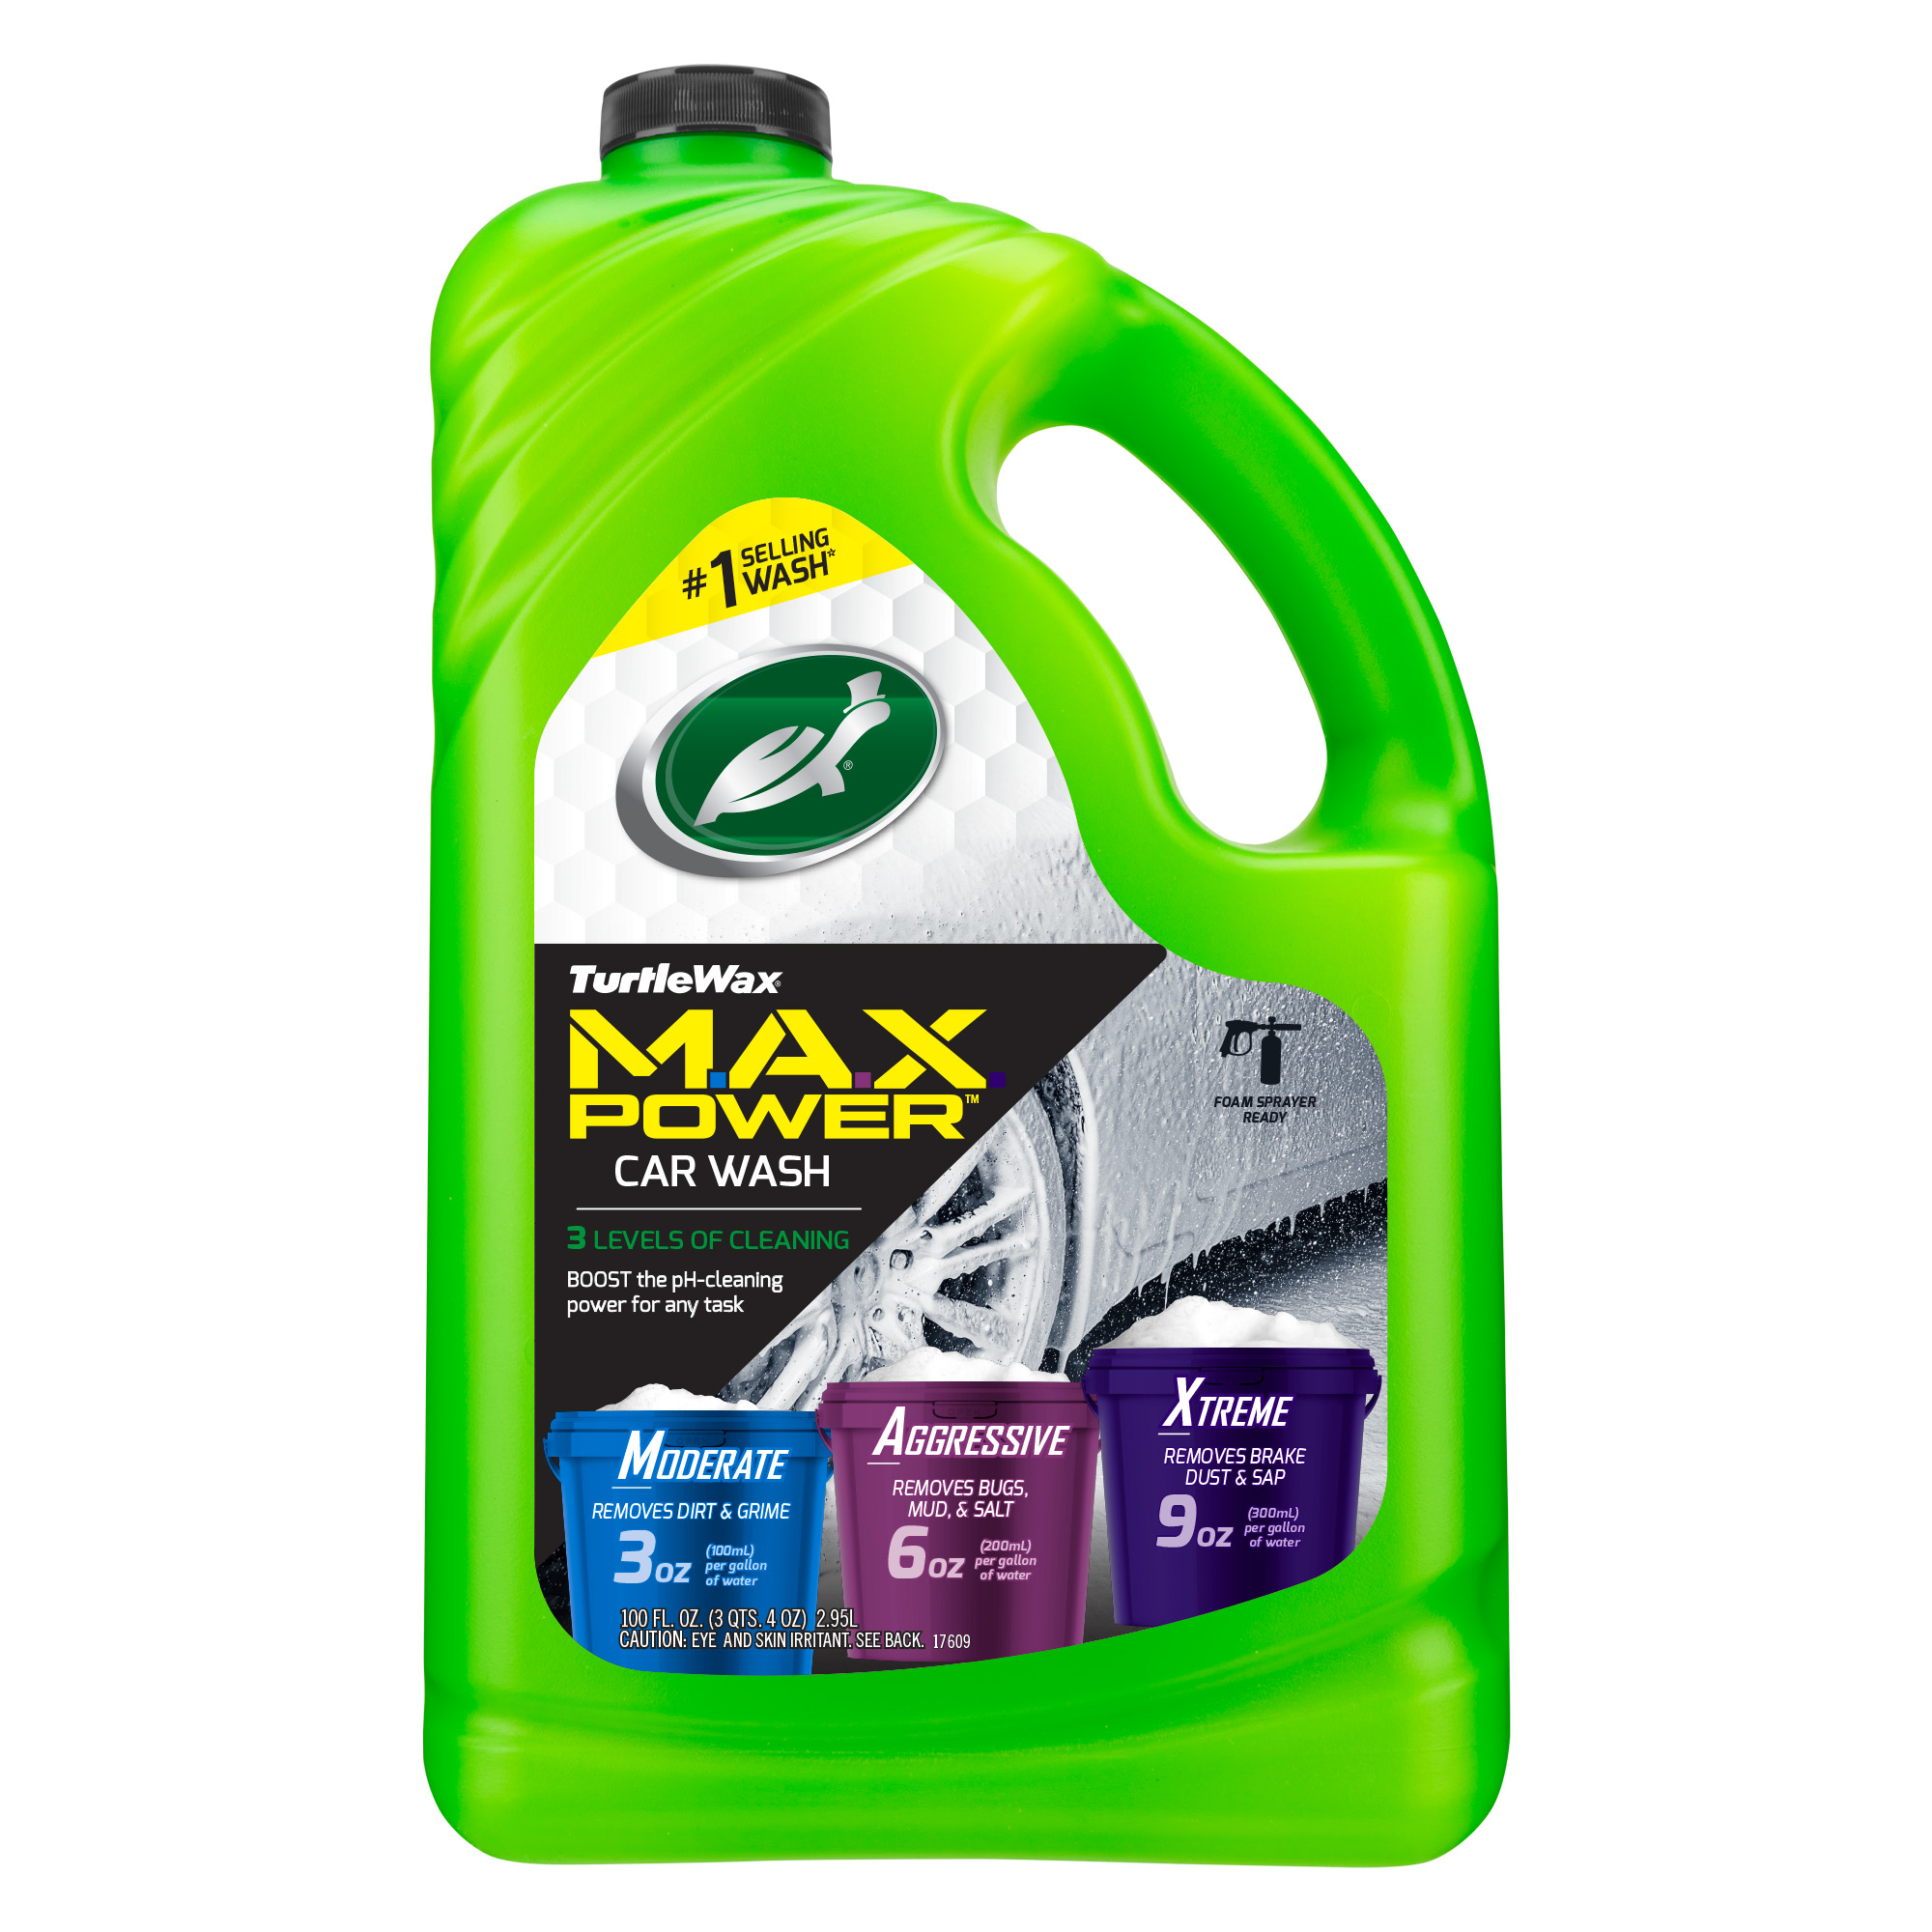 Turtle Wax 50597 Max-Power 3 Levels of Cleaning Car Wash, 100 oz - image 1 of 9